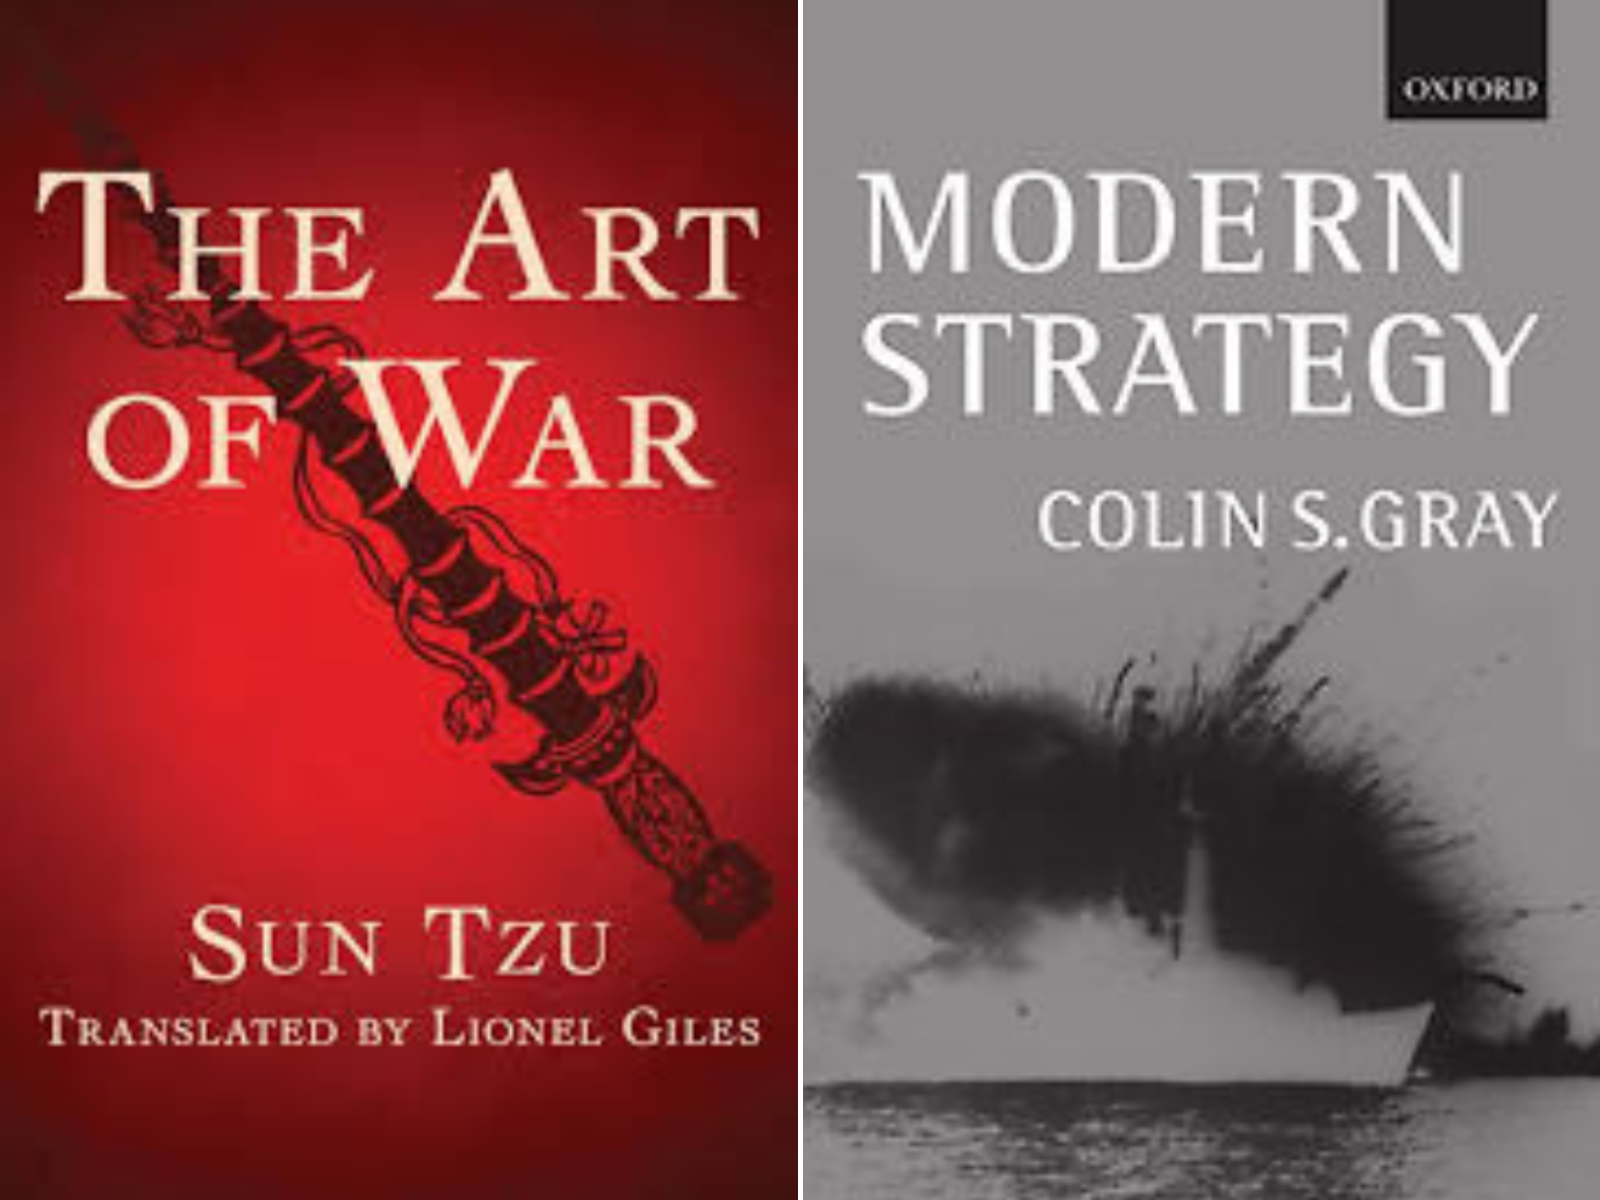 The Art of War and Modern Strategy book covers.